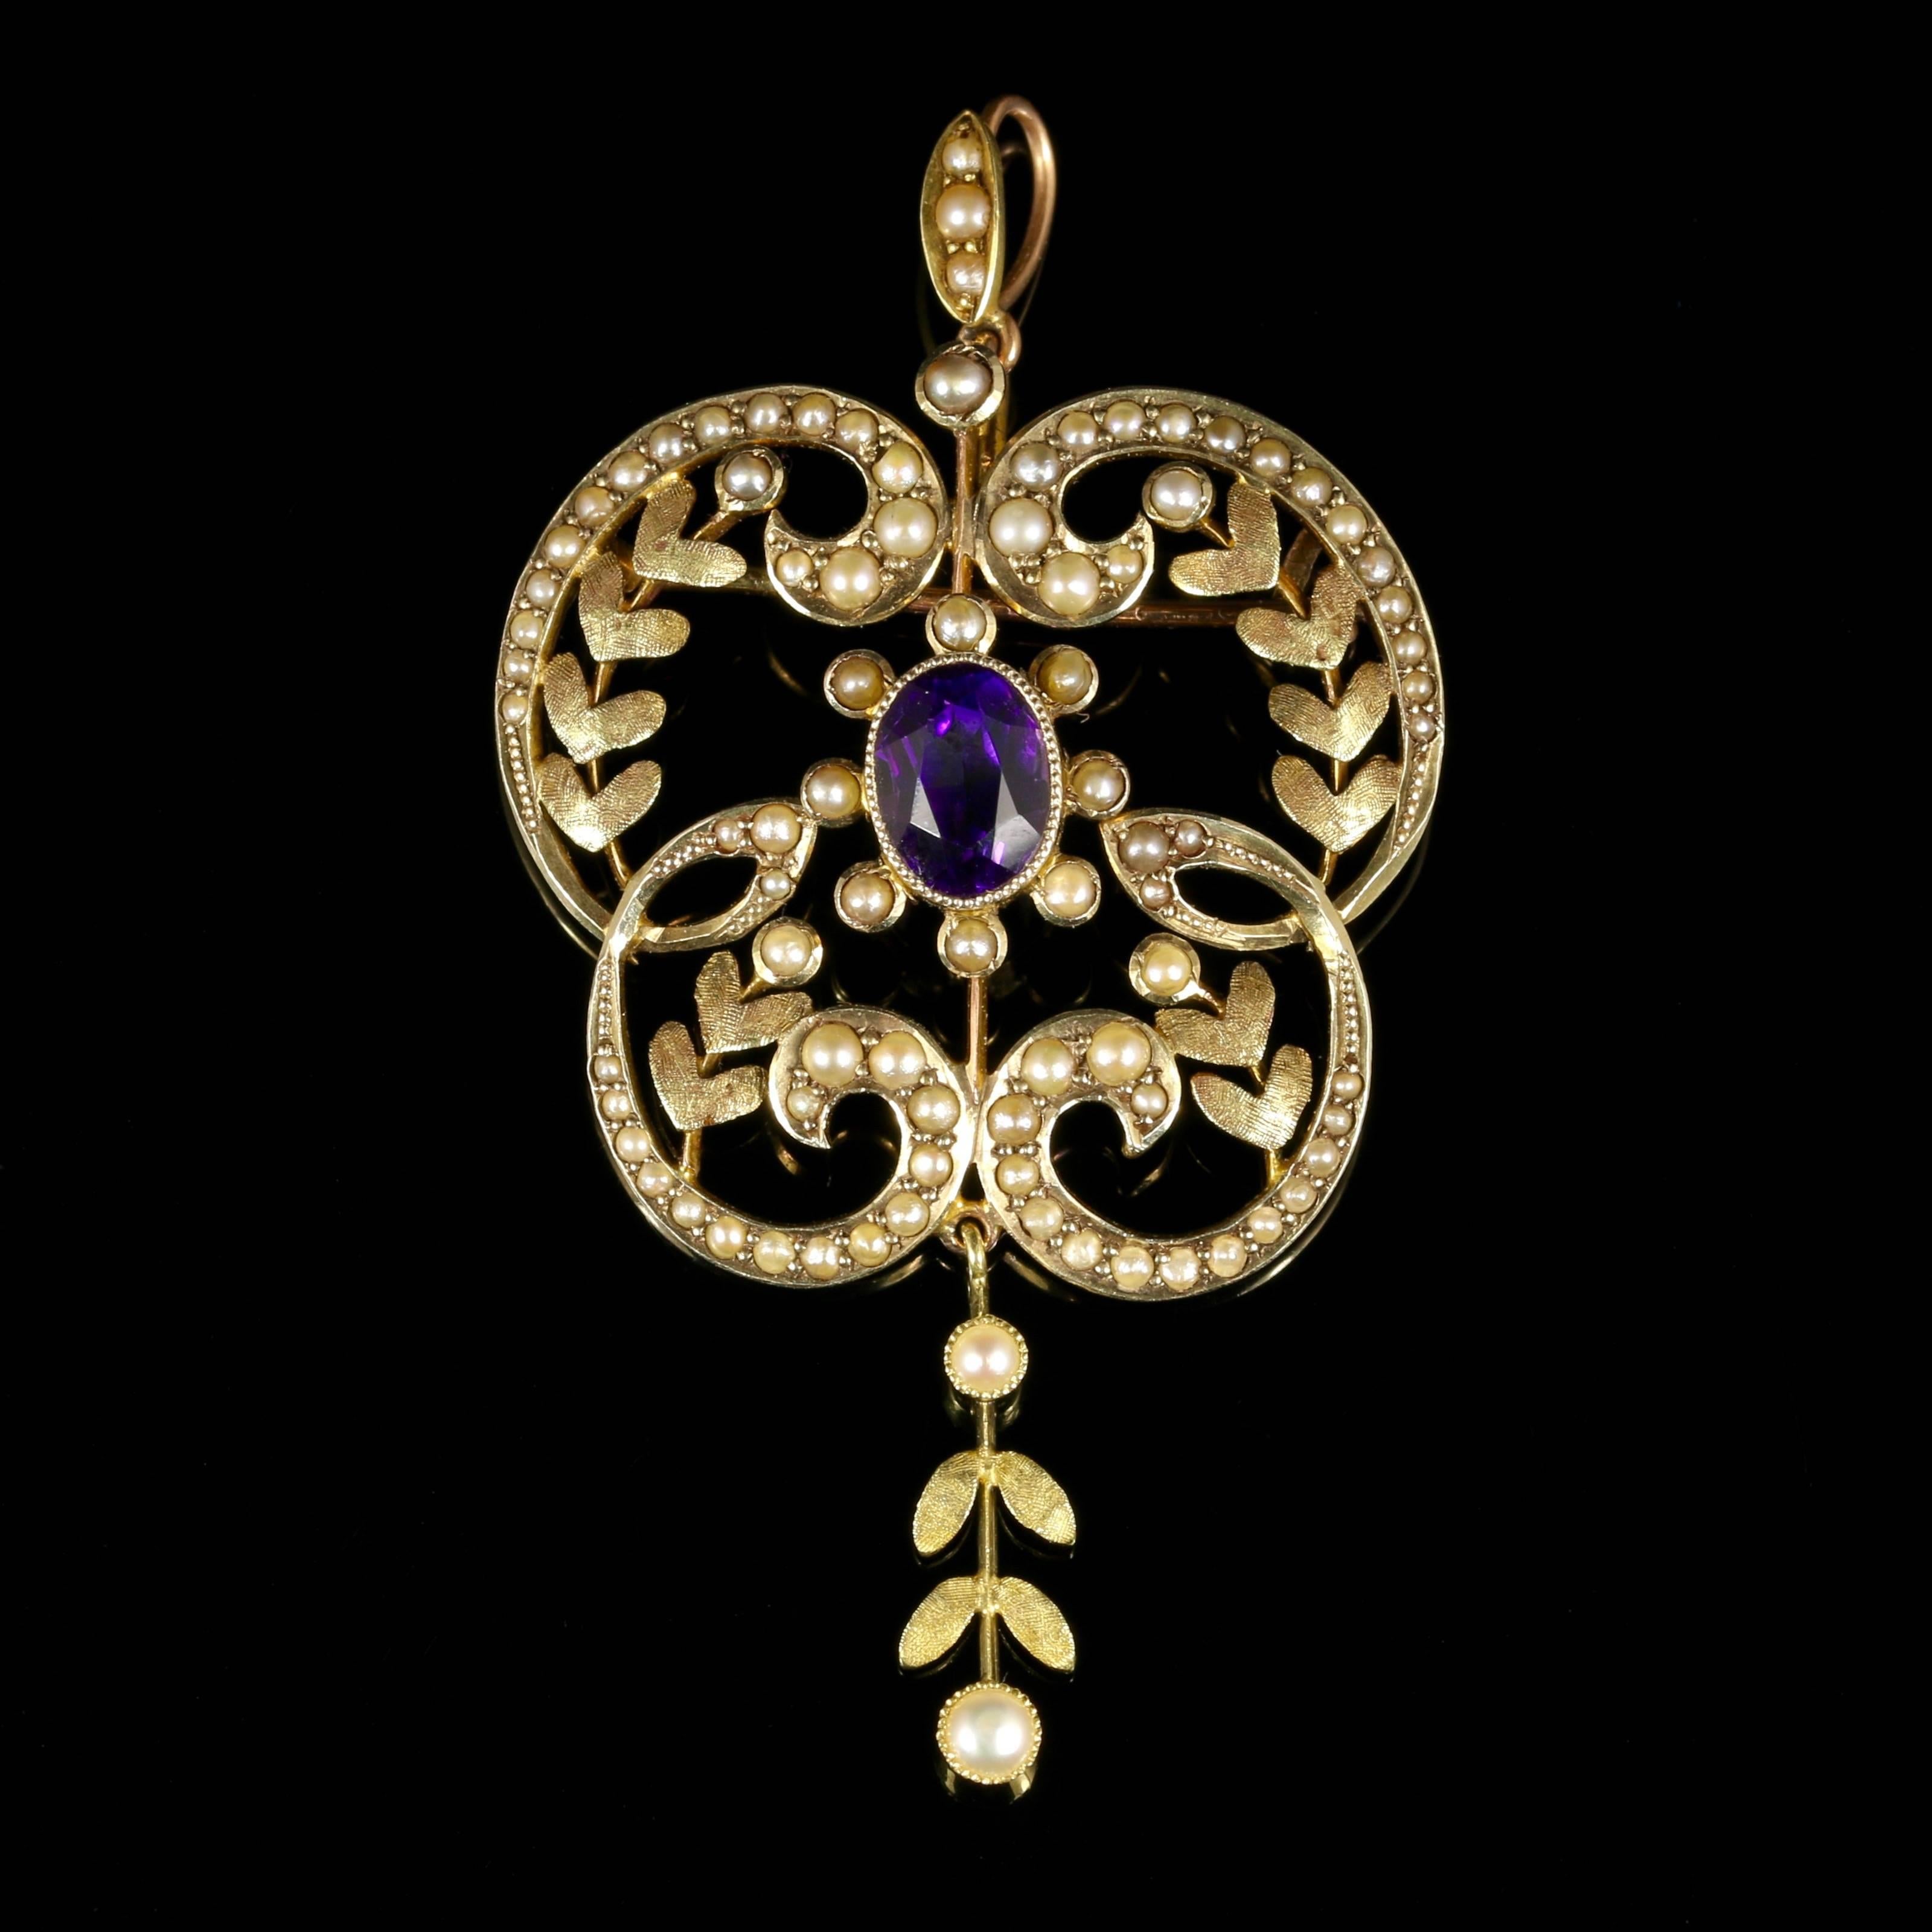 This fabulous 9ct Yellow Gold Victorian large pendant brooch is set with a rich lustrous Amethyst and beautiful Pearls.

This has to be one of the prettiest Victorian Amethyst pendants we have exhibited, with such fine detail. 

The three colours